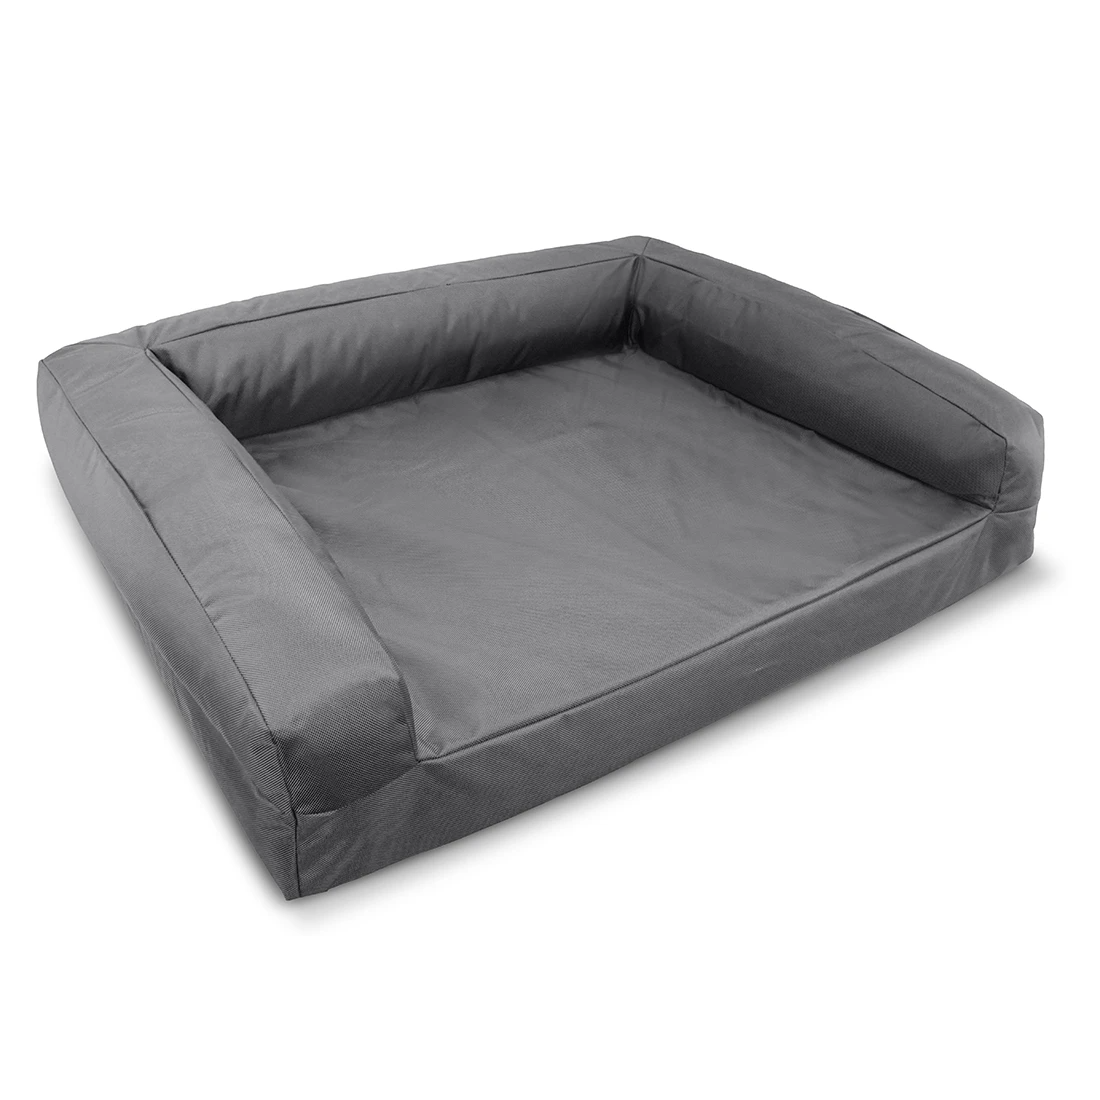 Titan Fortress Ballistic Bed Extra Cover